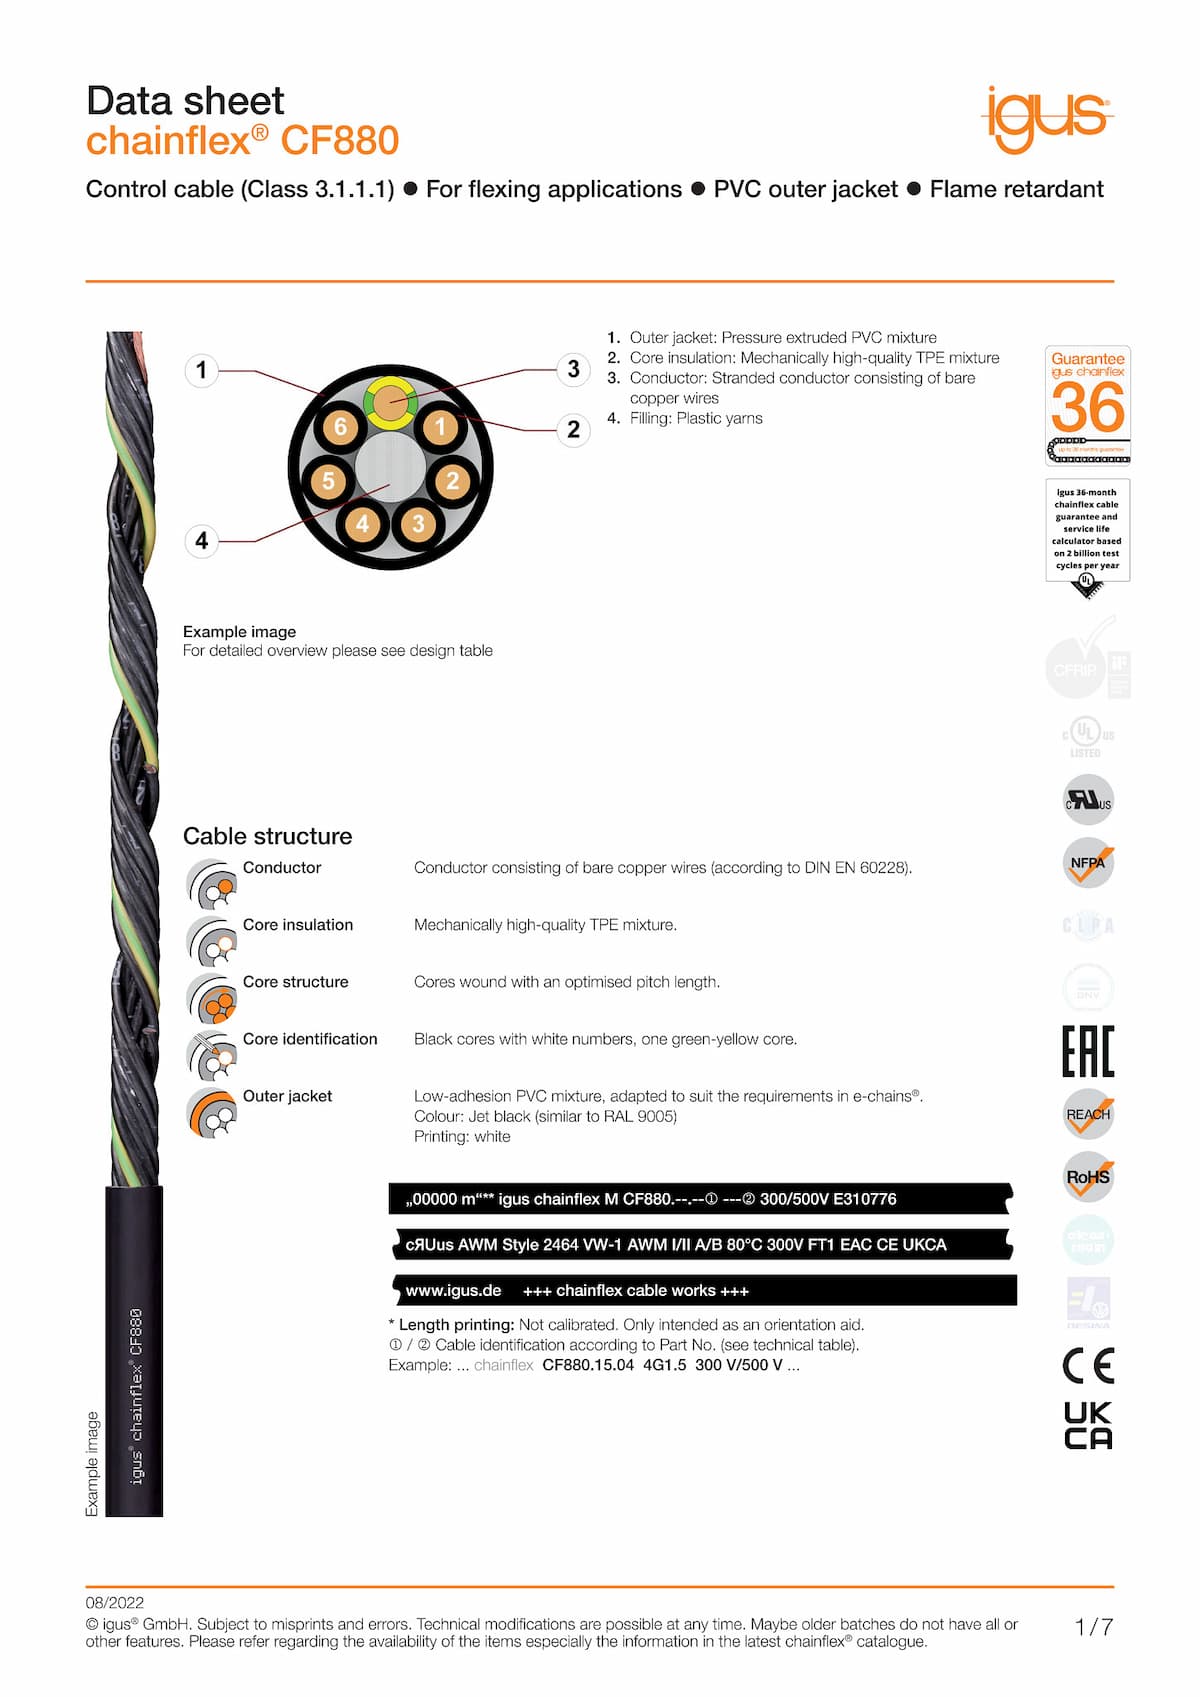 Technical data sheet chainflex® control cable CF880